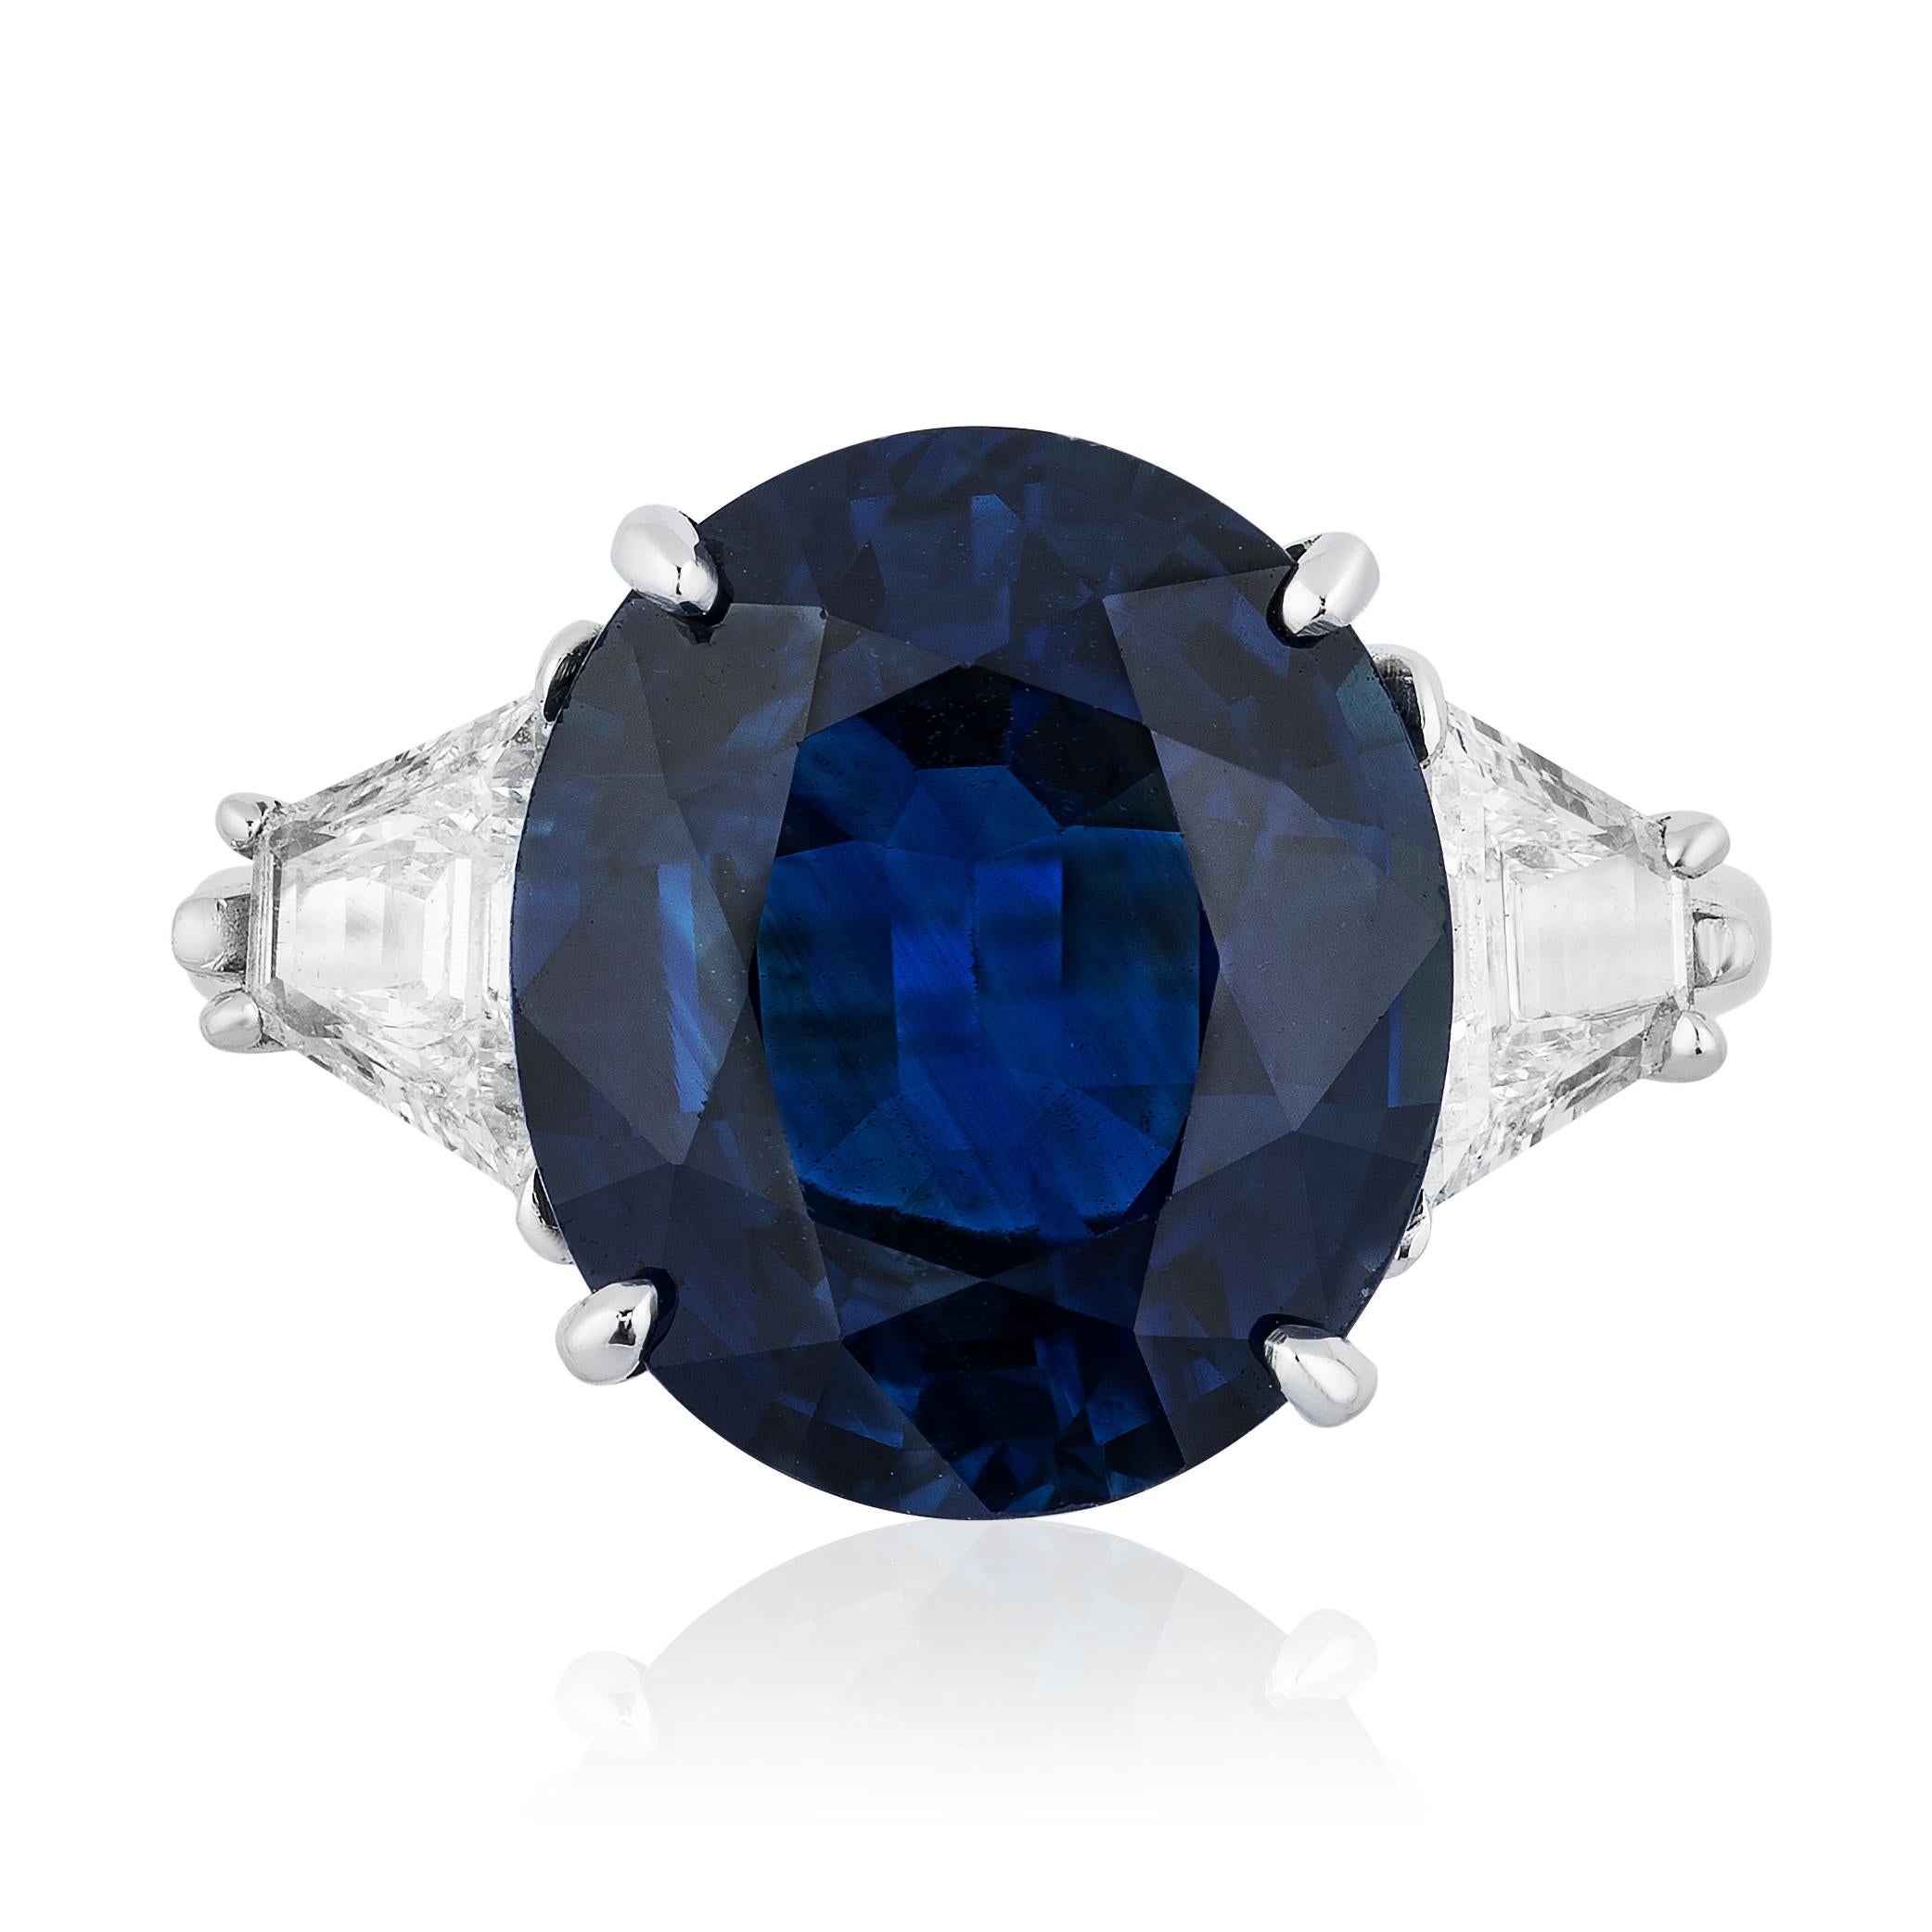 Andreoli 9.38 Carat Blue Sapphire CDC Certified Engagement Ring Platinum

This Andreoli ring features:

1.03 carat Diamond
9.38 carat Blue Sapphire Certified by CDC Swiss based gemology laboratory. Thailand Origin.
Platinum

Made in Italy